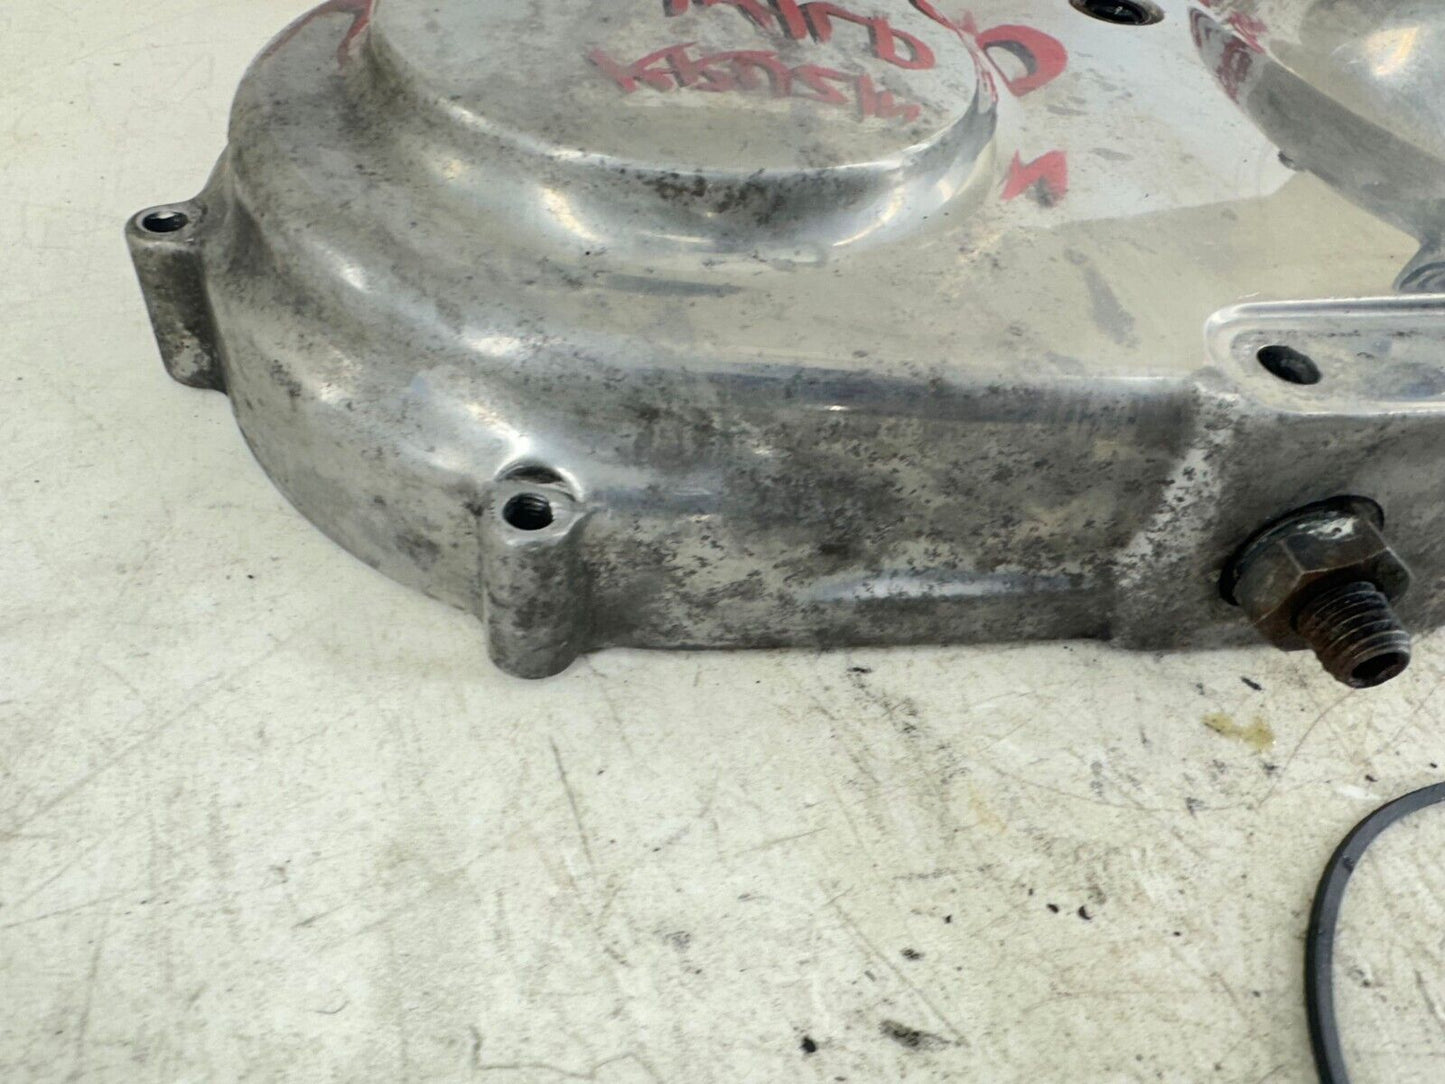 2003 Harley Davidson Sportster Primary Clutch Cover Case Housing